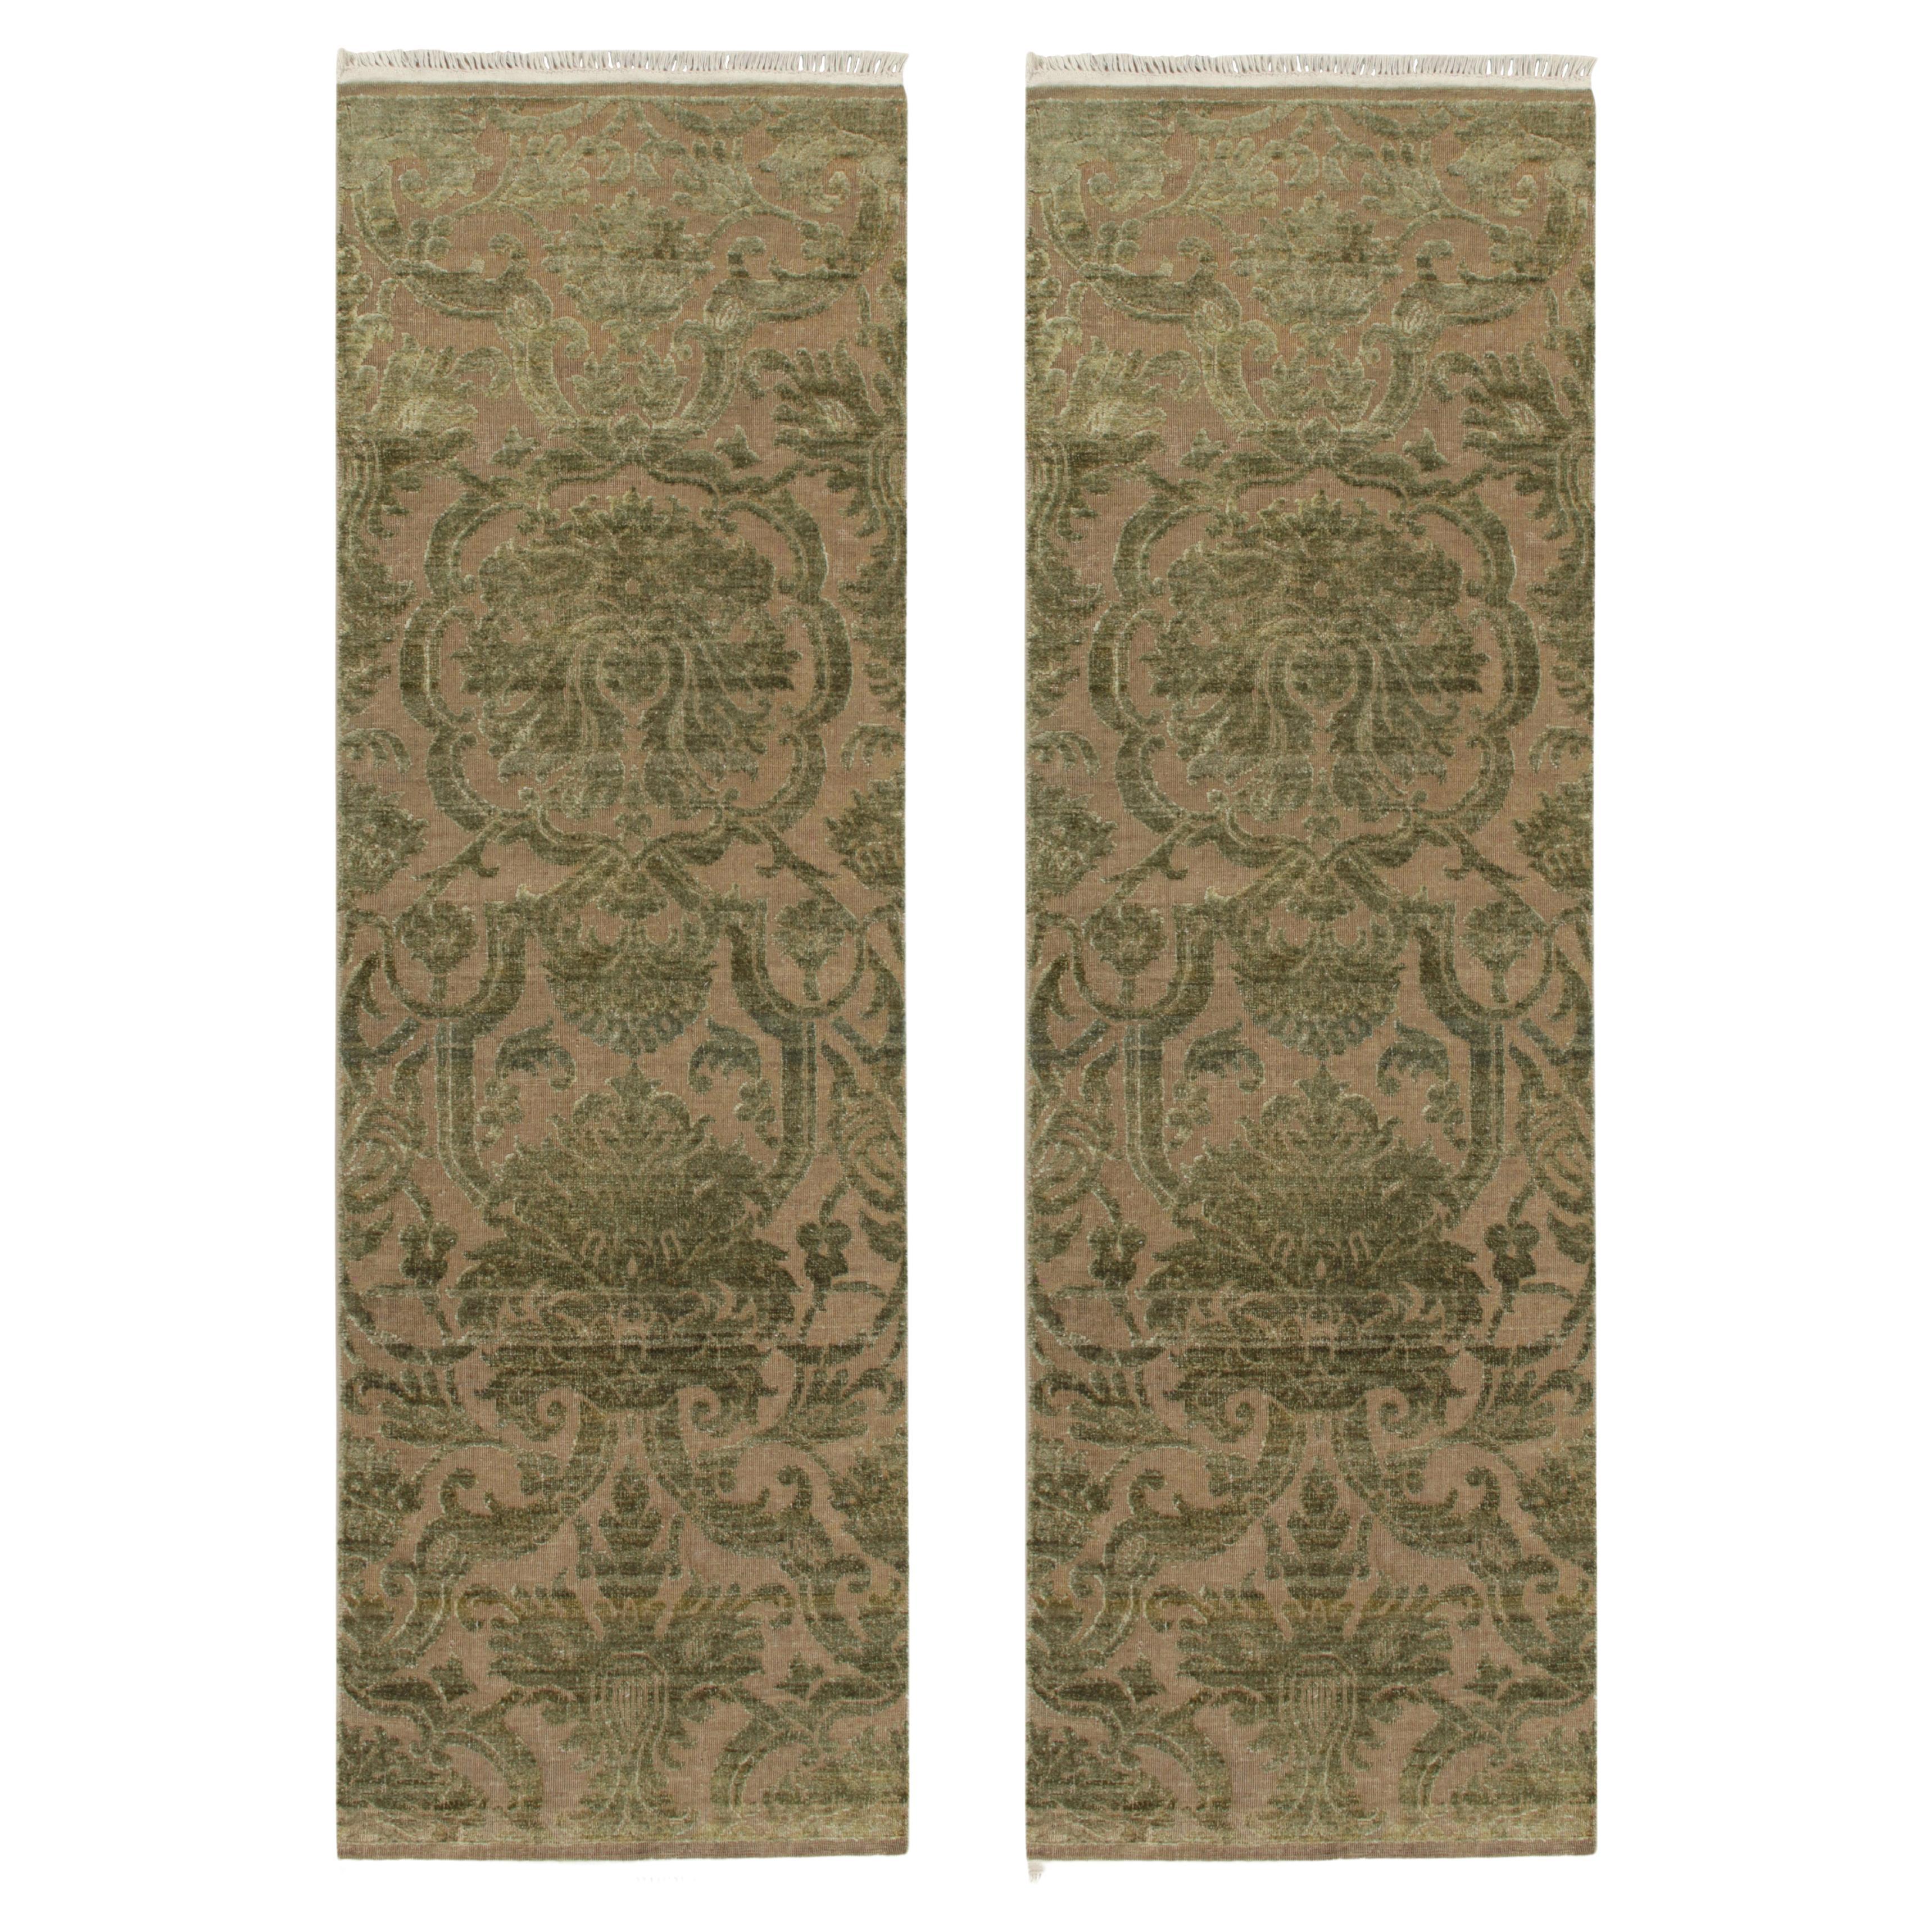 Rug & Kilim’s European Style Twin Runners in Beige with Green Floral Patterns For Sale